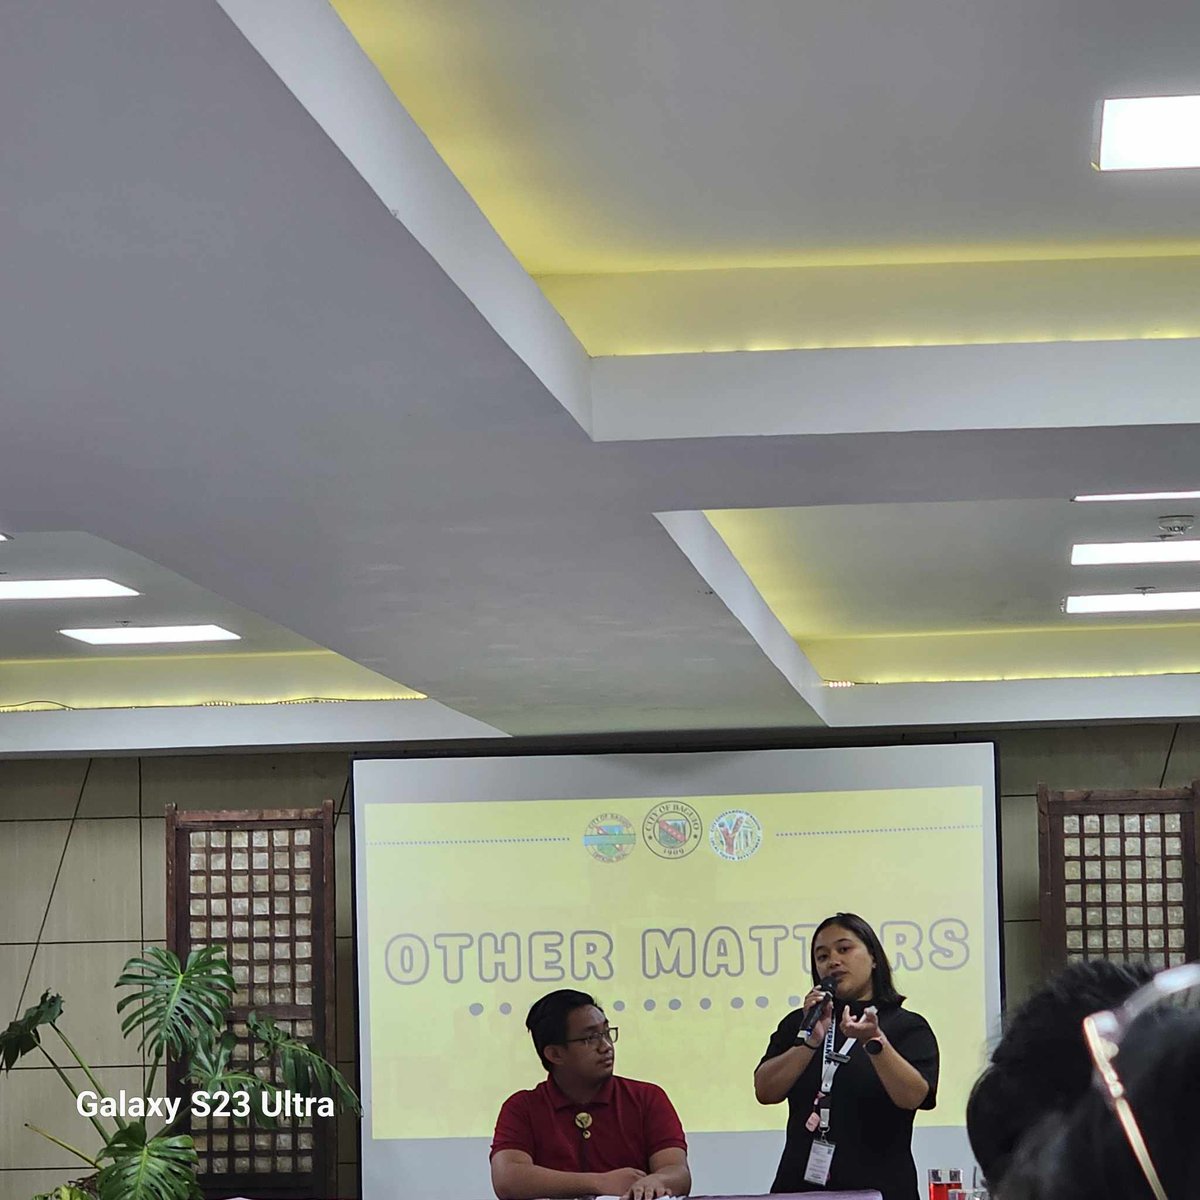 #AreaNews | BAGUIO CITY LYDC SUCCESSFULLY HOLDS 2ND QUARTER MEETING Read more: facebook.com/nationalyouthc… #FortheFilipinoYouth